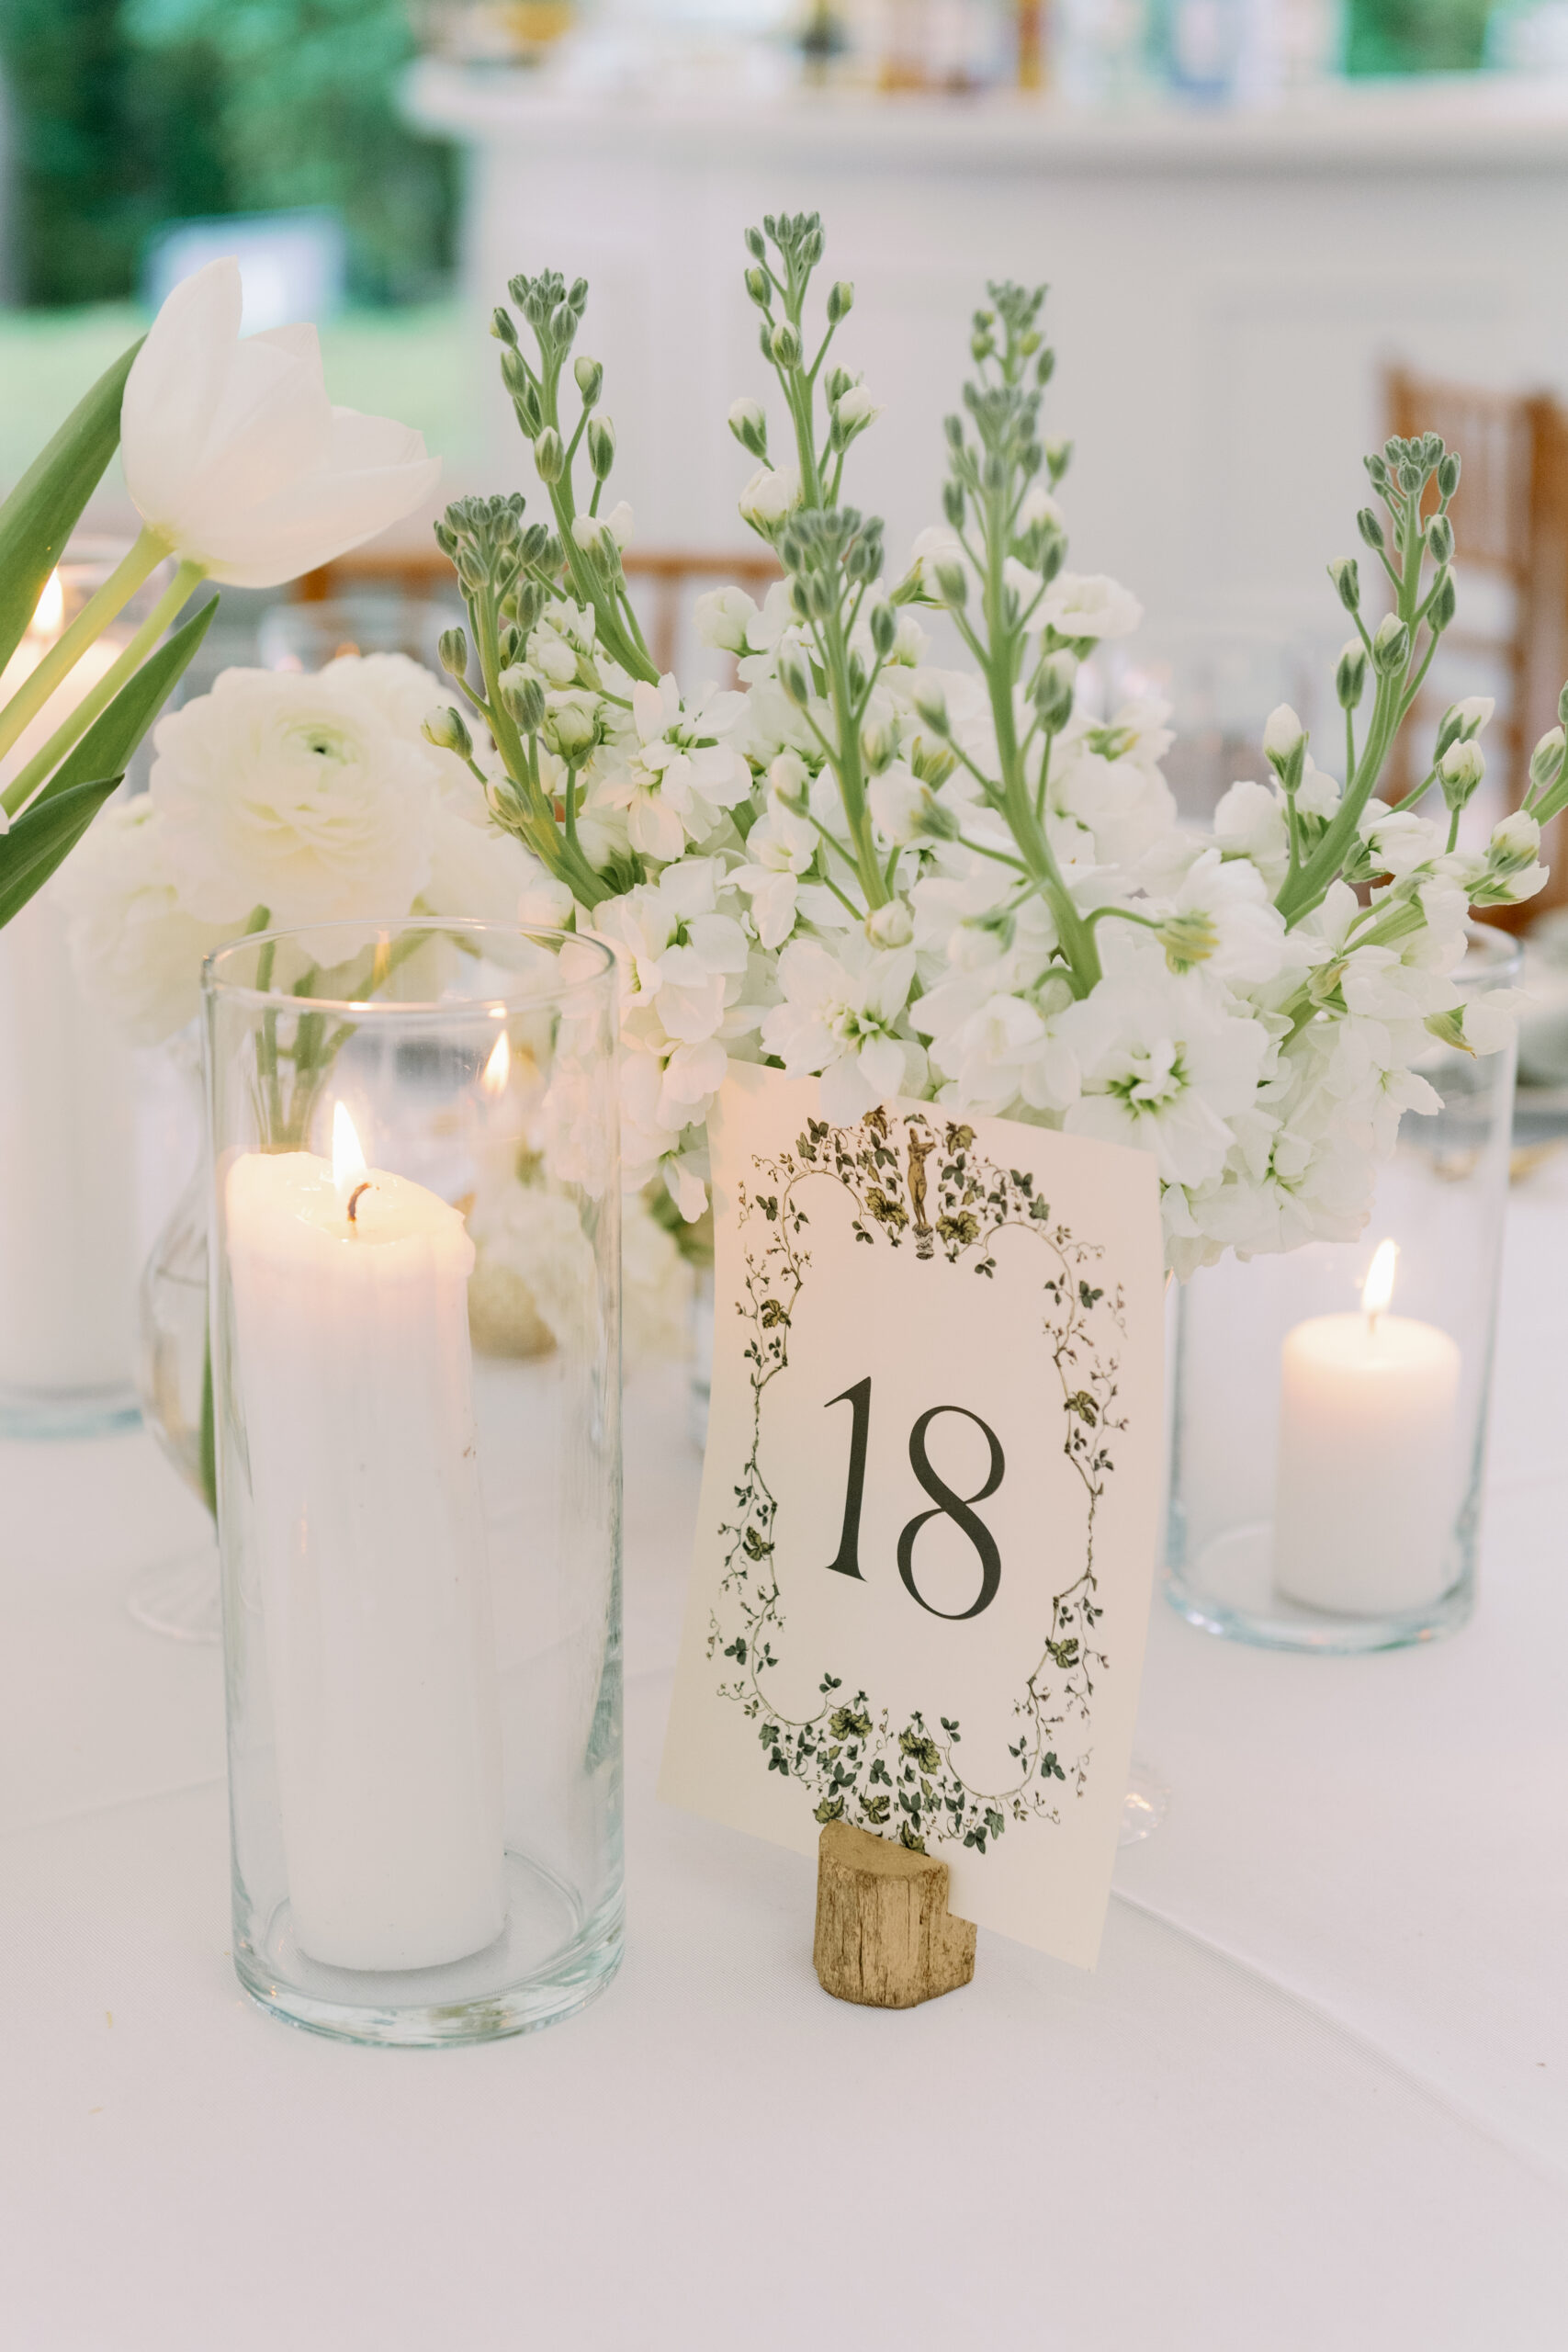 Goodstone Inn wedding table number by Jolly edition